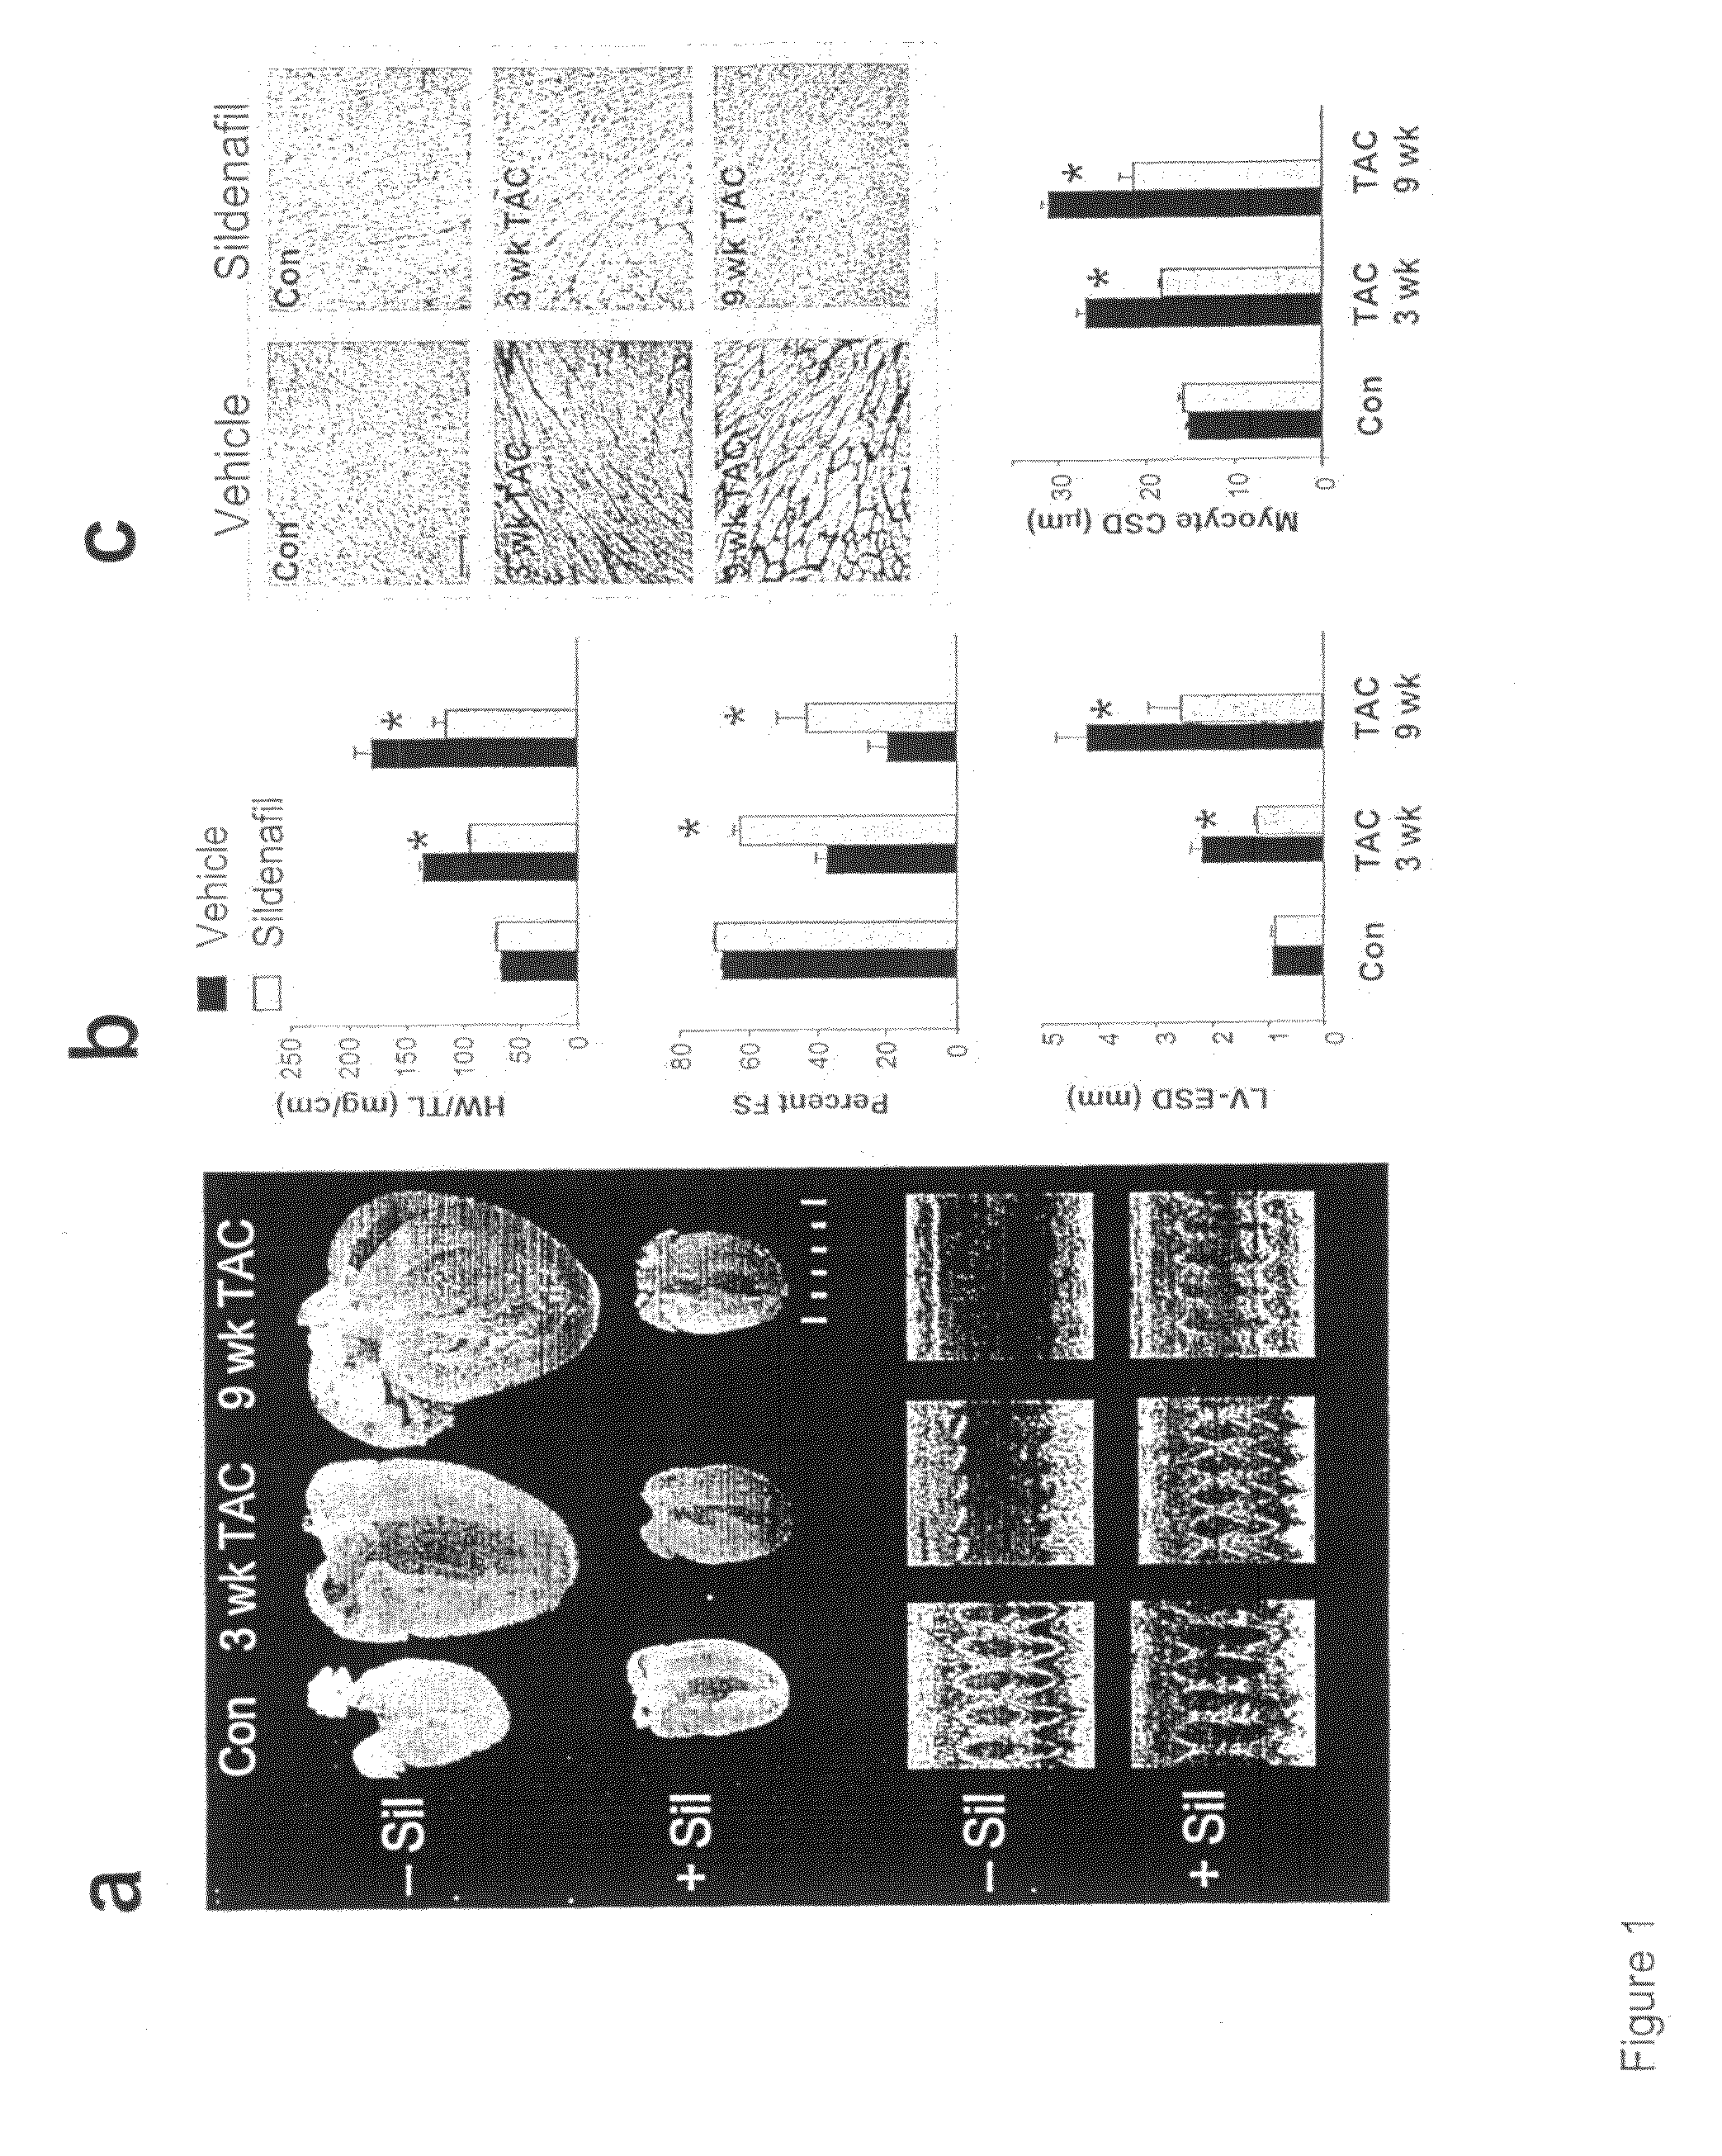 PDE5 inhibitor compositions and methods for treating cardiac indications